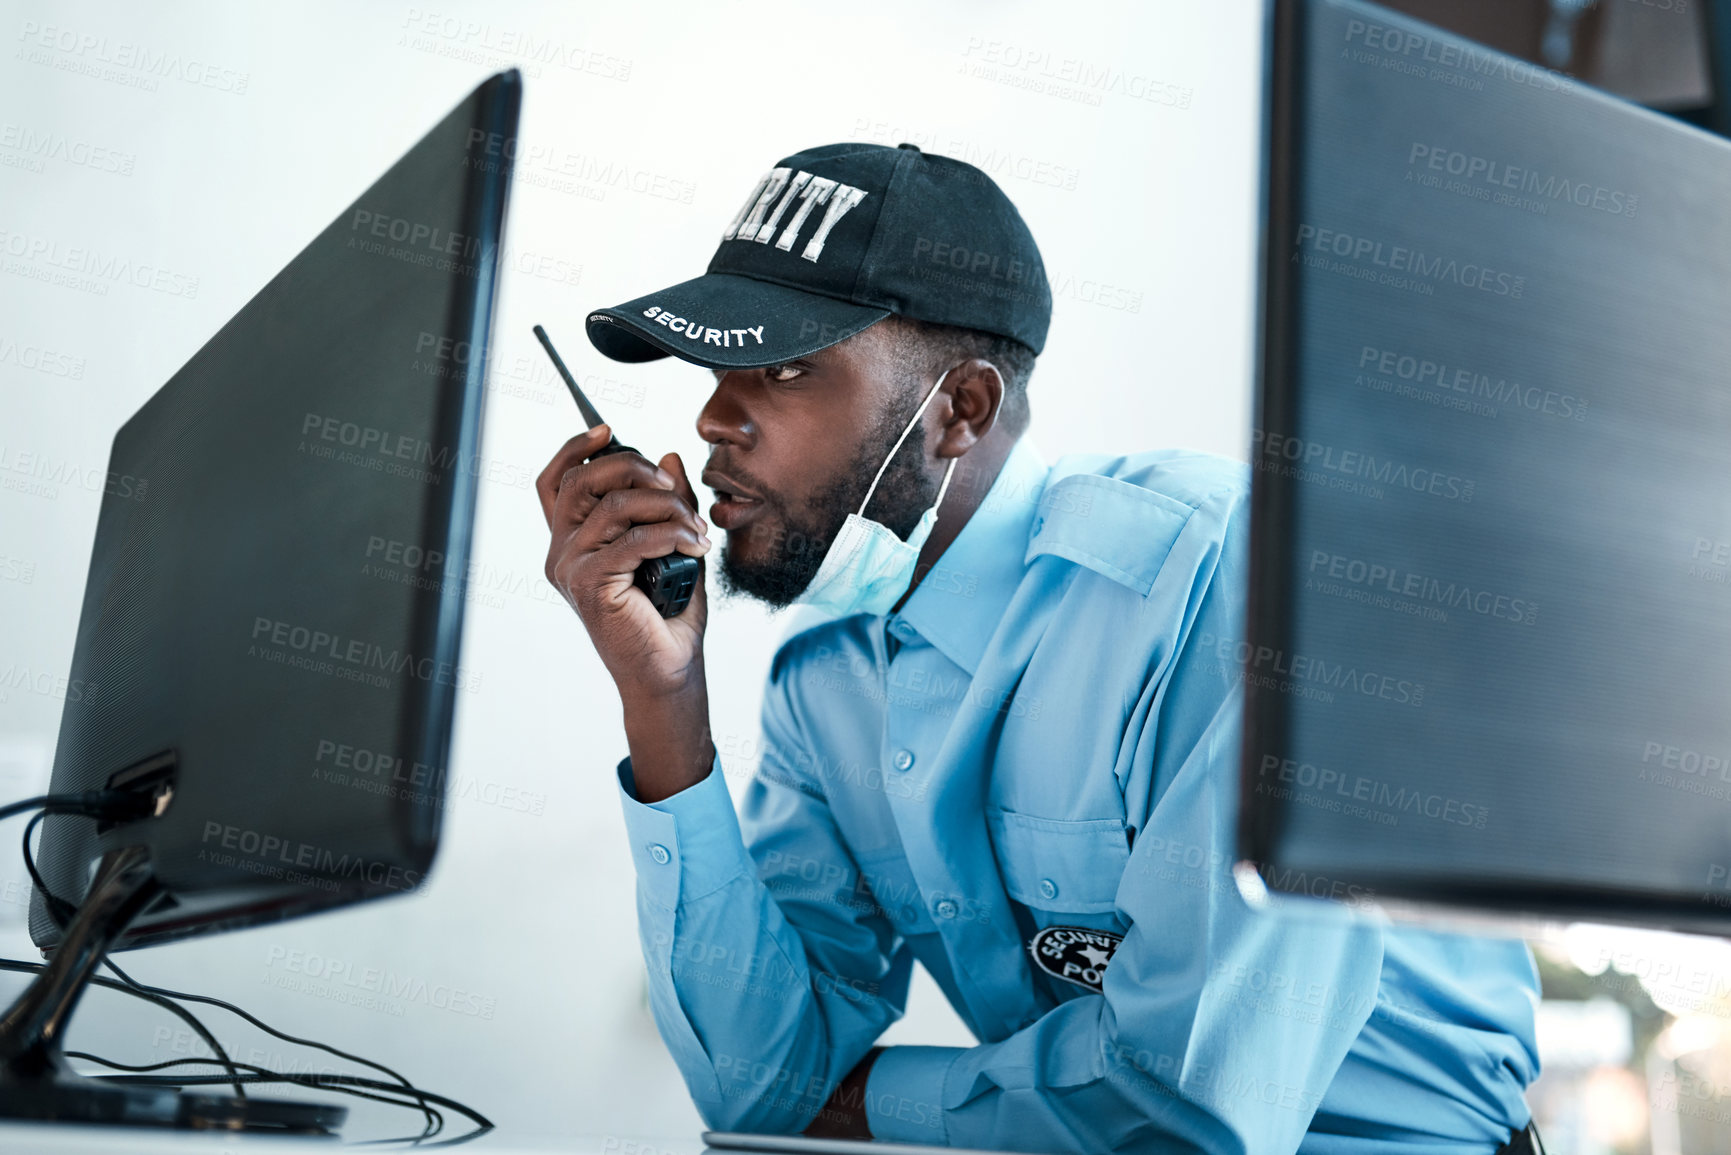 Buy stock photo Shot of a young security guard using a two way radio while monitoring the cctv cameras